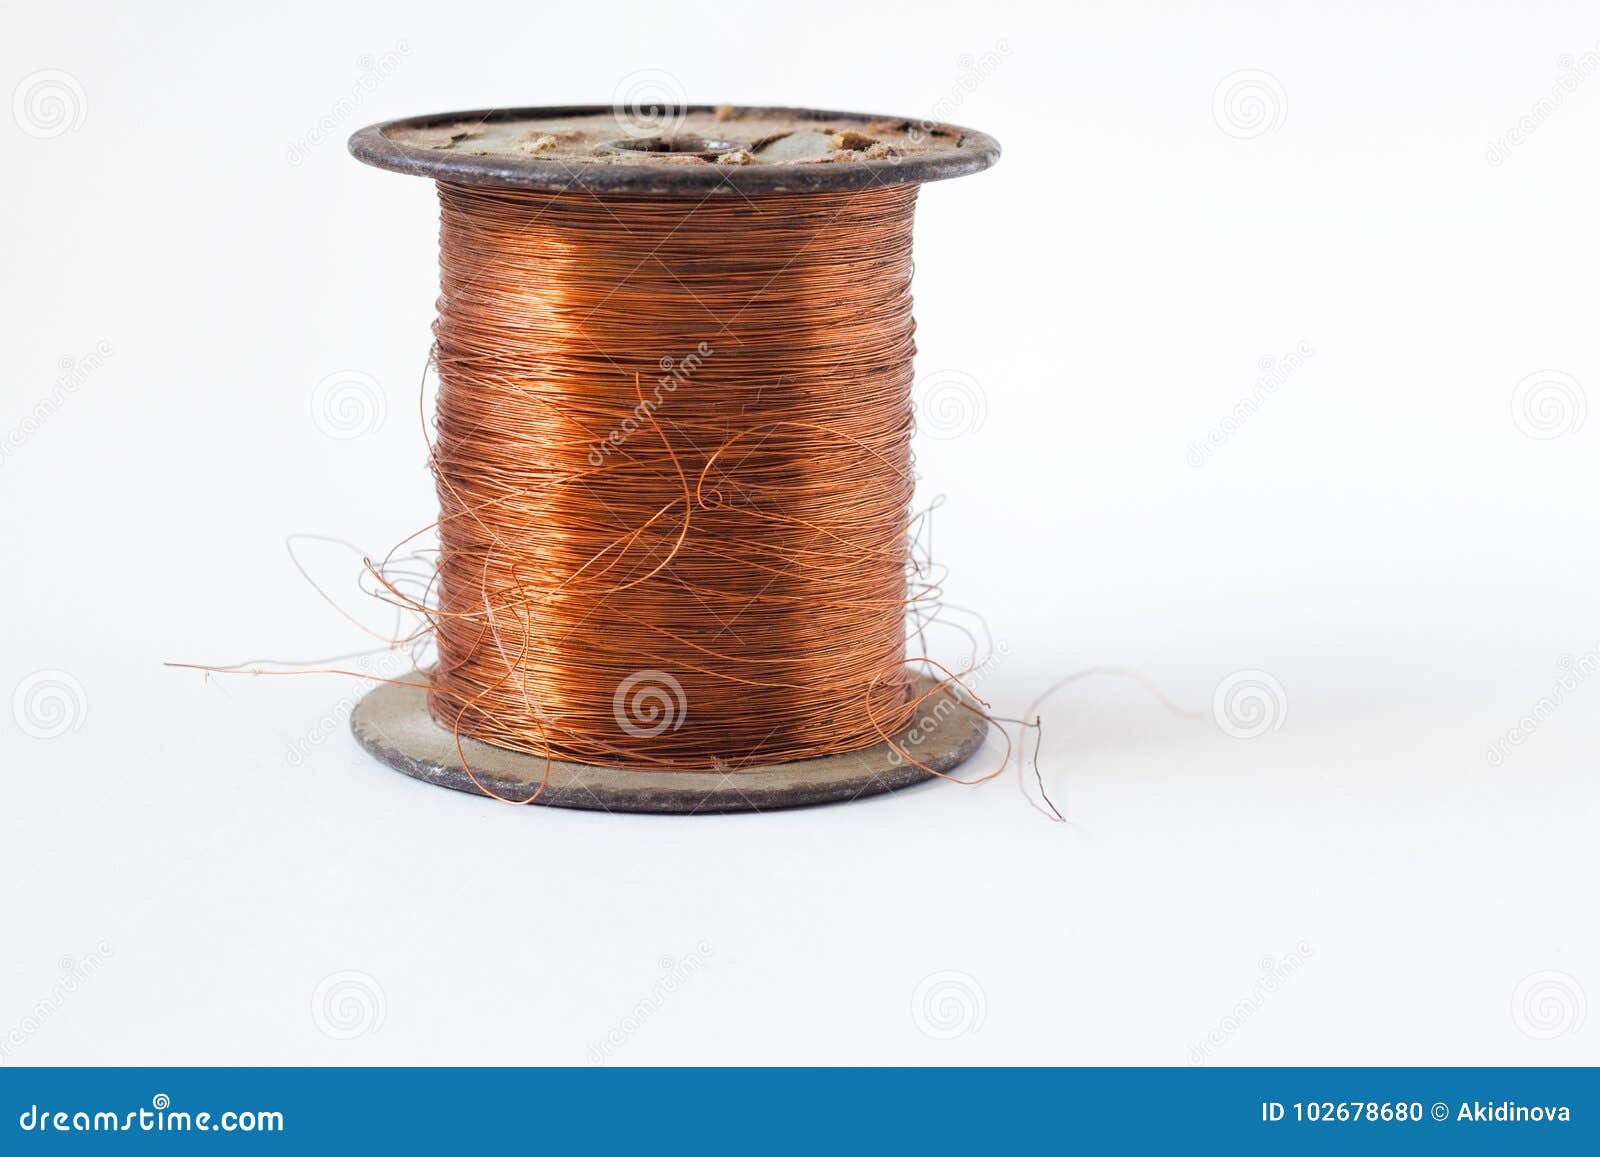 copper wire on spool,  on white backgrounds, with clipping paths on white background .